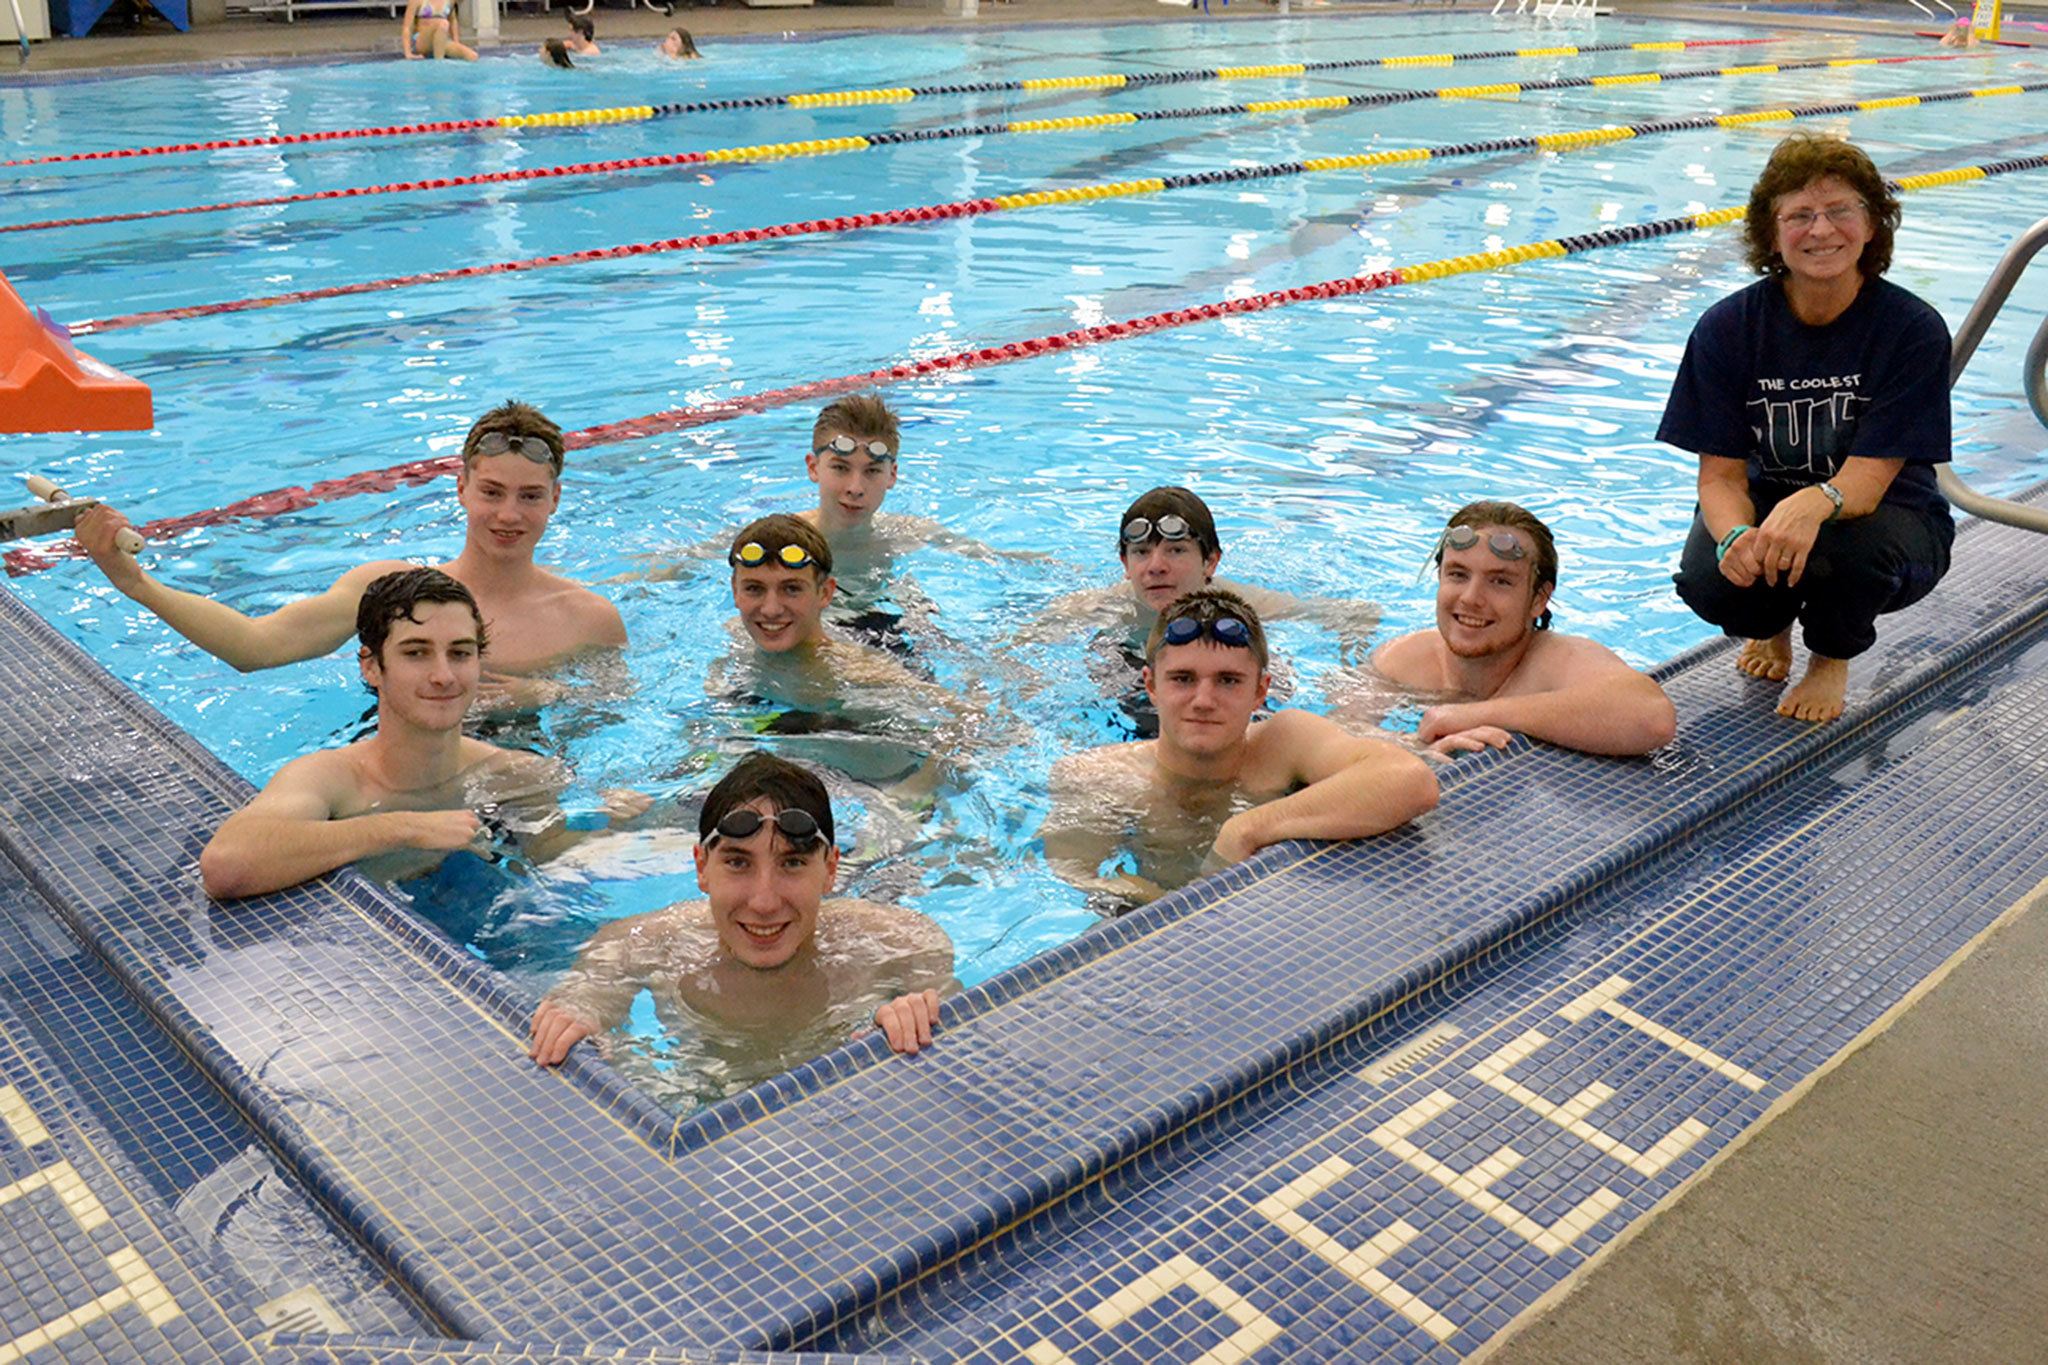 This year’s Sequim High School boys swim team features, from back left, Jax Thaxton, Alex Barikoff; middle left, Ian Miller, Liam Payne, Sam Frymer; front left, Christian Goodrich, Michael Larsen, James Thayer; not pictured Tanner Minnihan and Ngiah “Steve” Nguyen. Sequim Gazette photo by Matthew Nash